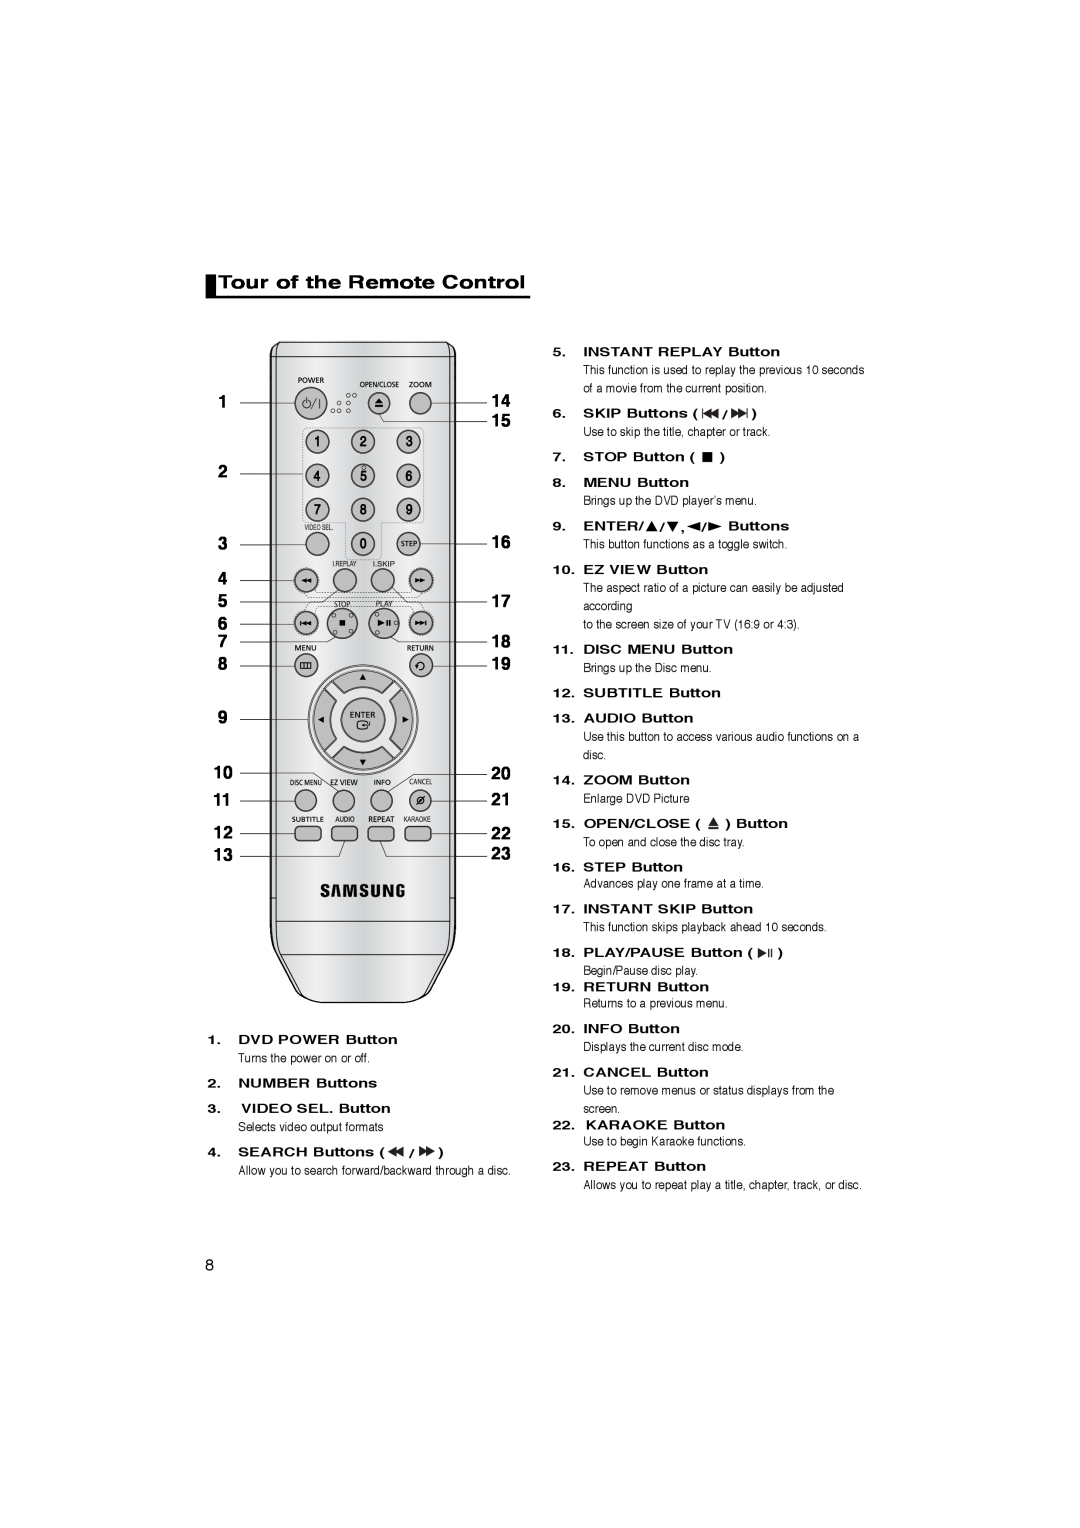 Samsung DVD-P260K/AFR manual Tour of the Remote Control, DVD POWER Button Turns the power on or off 2. NUMBER Buttons 